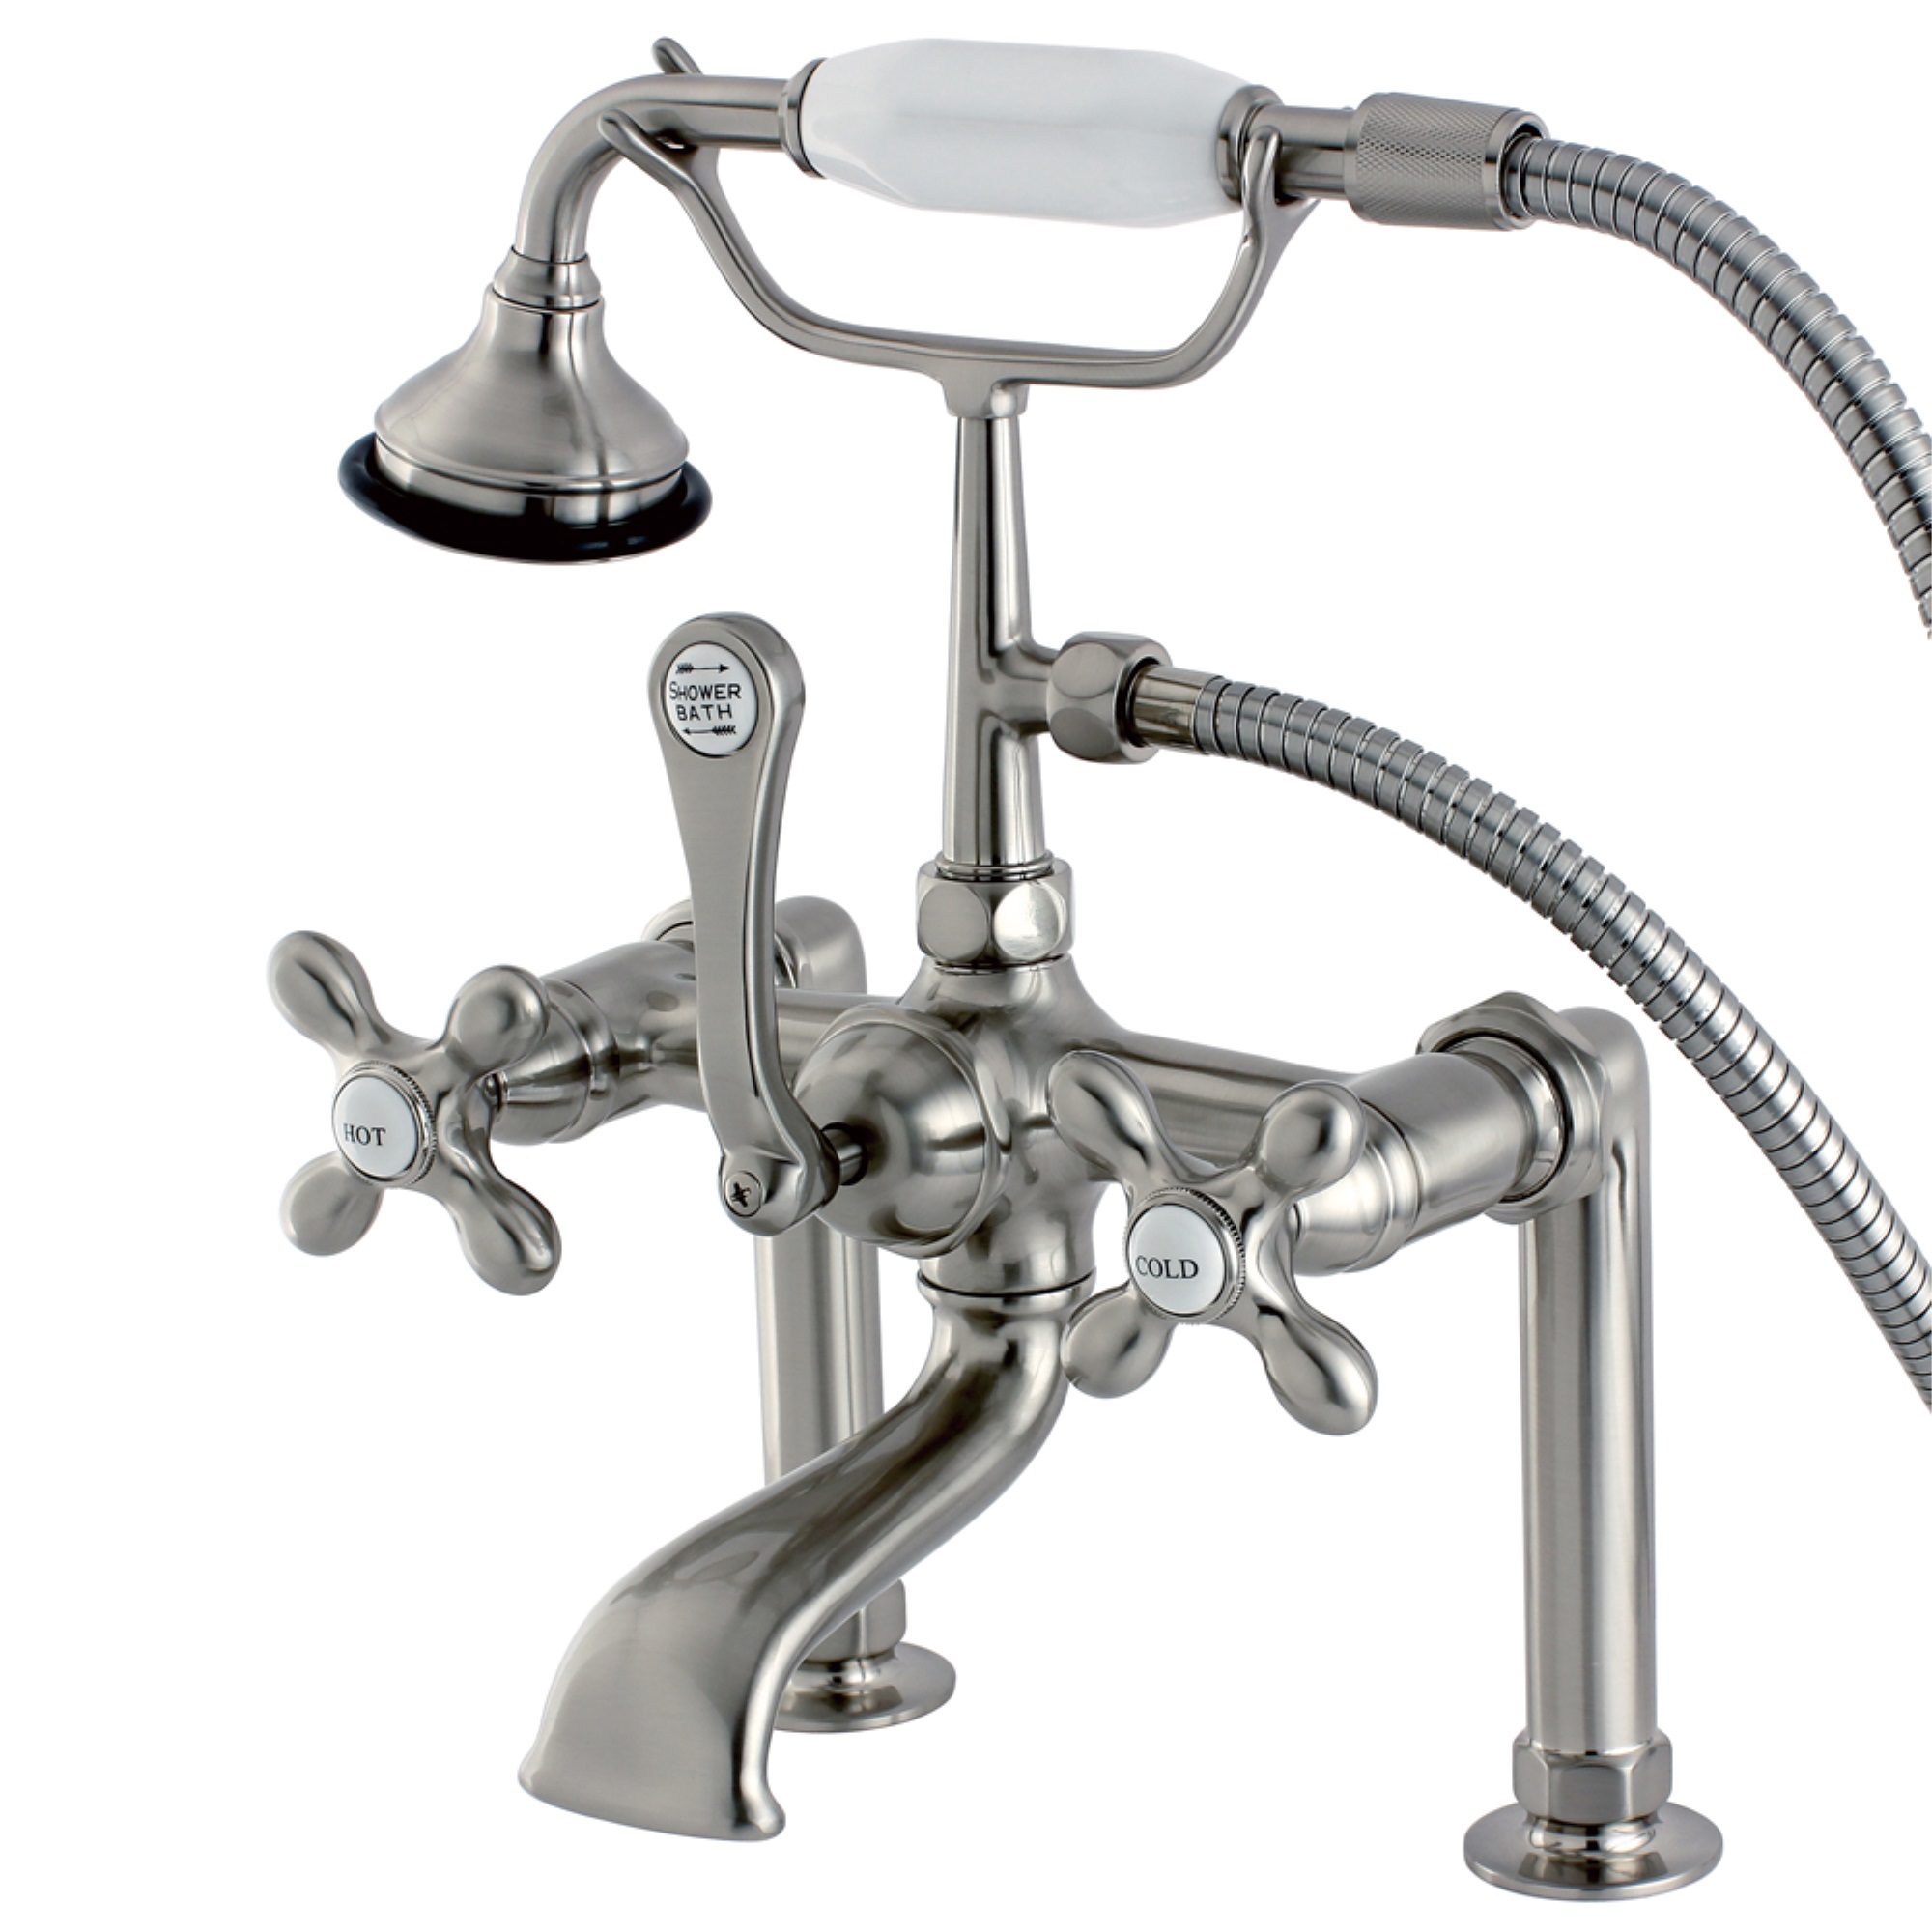 Kingston Brass AE109T8 Auqa Vintage Deck Mount Clawfoot Tub Faucet, Brushed Nickel